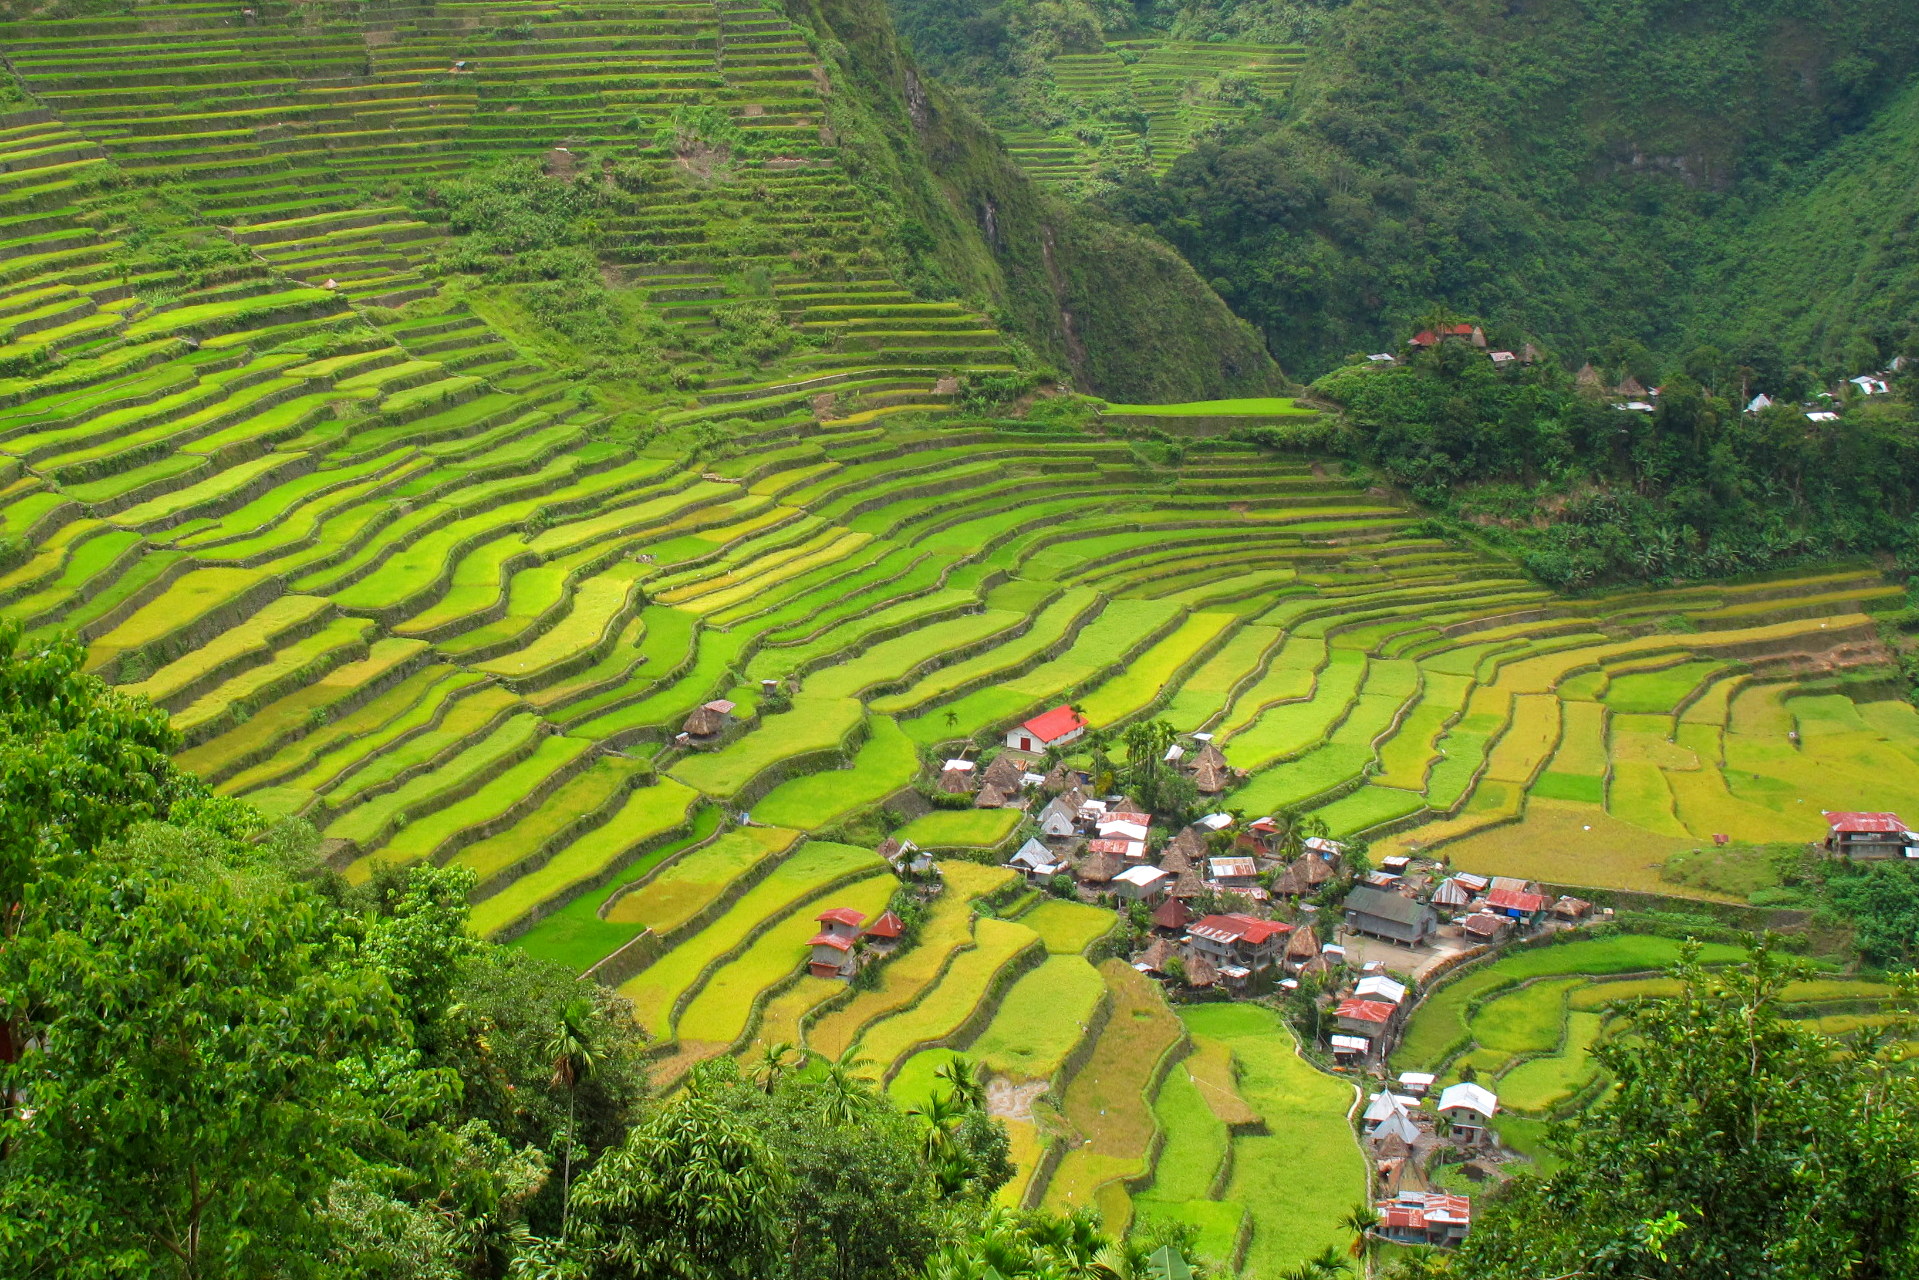 Photos that will make you want to visit Banaue Rice Terraces